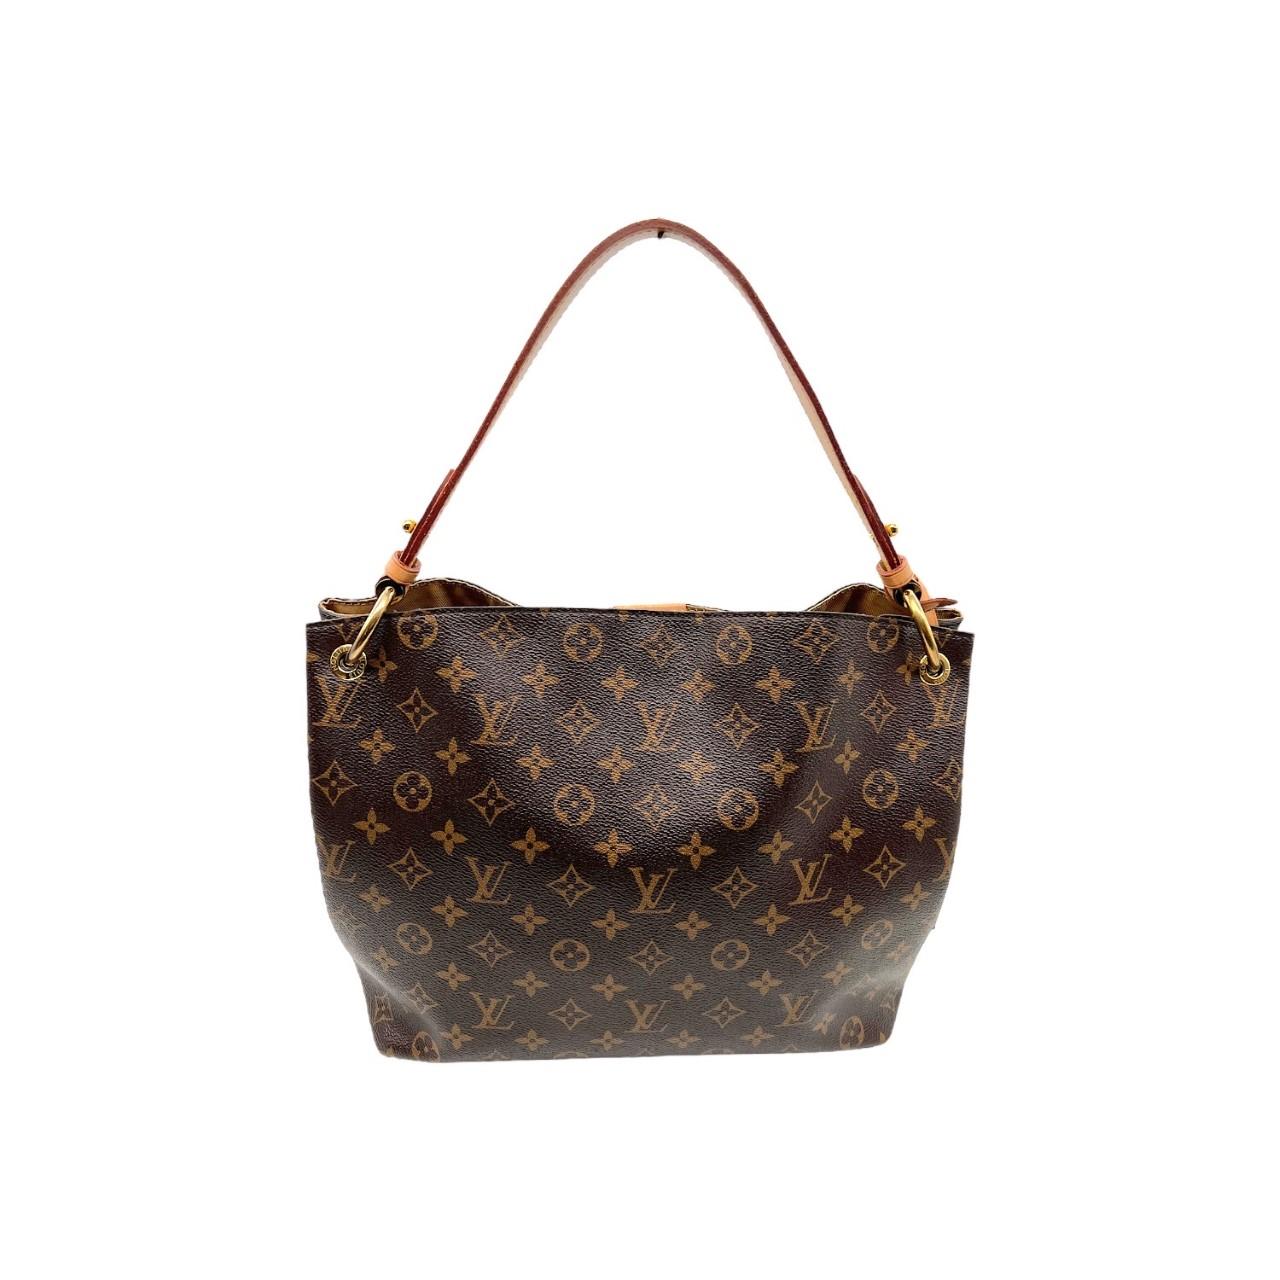 We are offering this beautiful Louis Vuitton Monogram Graceful PM. Made in France, it is finely crafted of the classic Louis Vuitton Monogram coated canvas exterior with gold-tone hardware and leather trimming. It has a flat leather handle and it